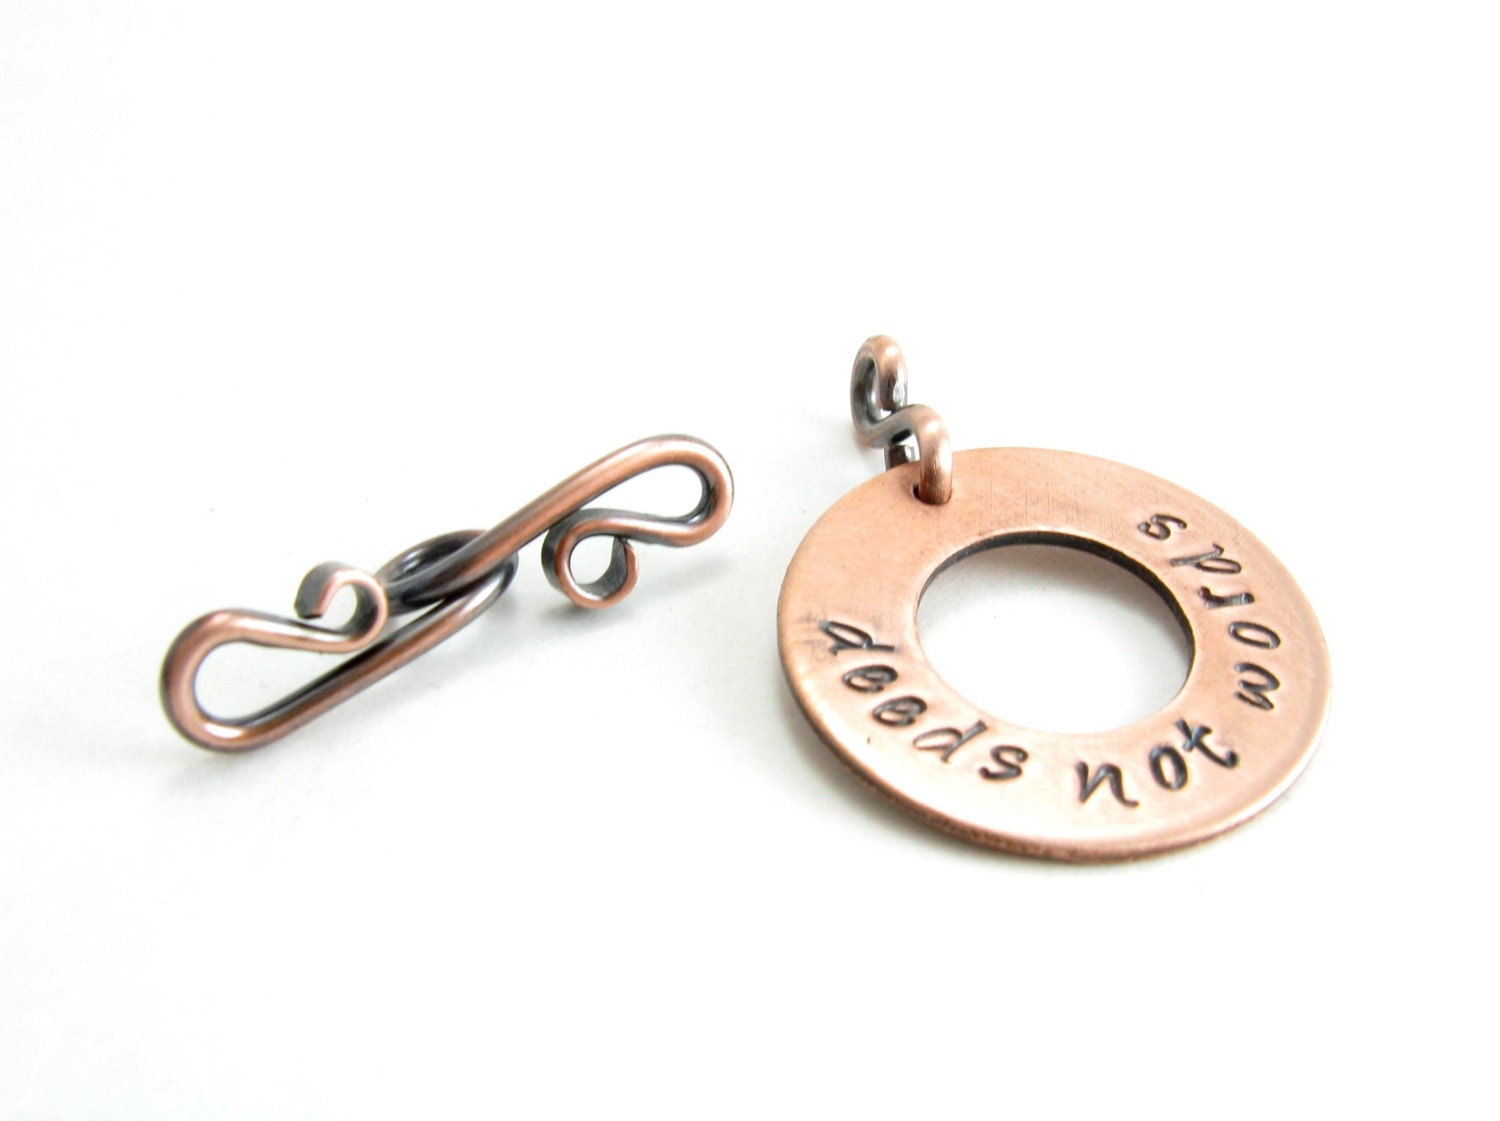 Deeds Not Words Copper Toggle Clasp Handmade Jewelry Supplies - BooBeads